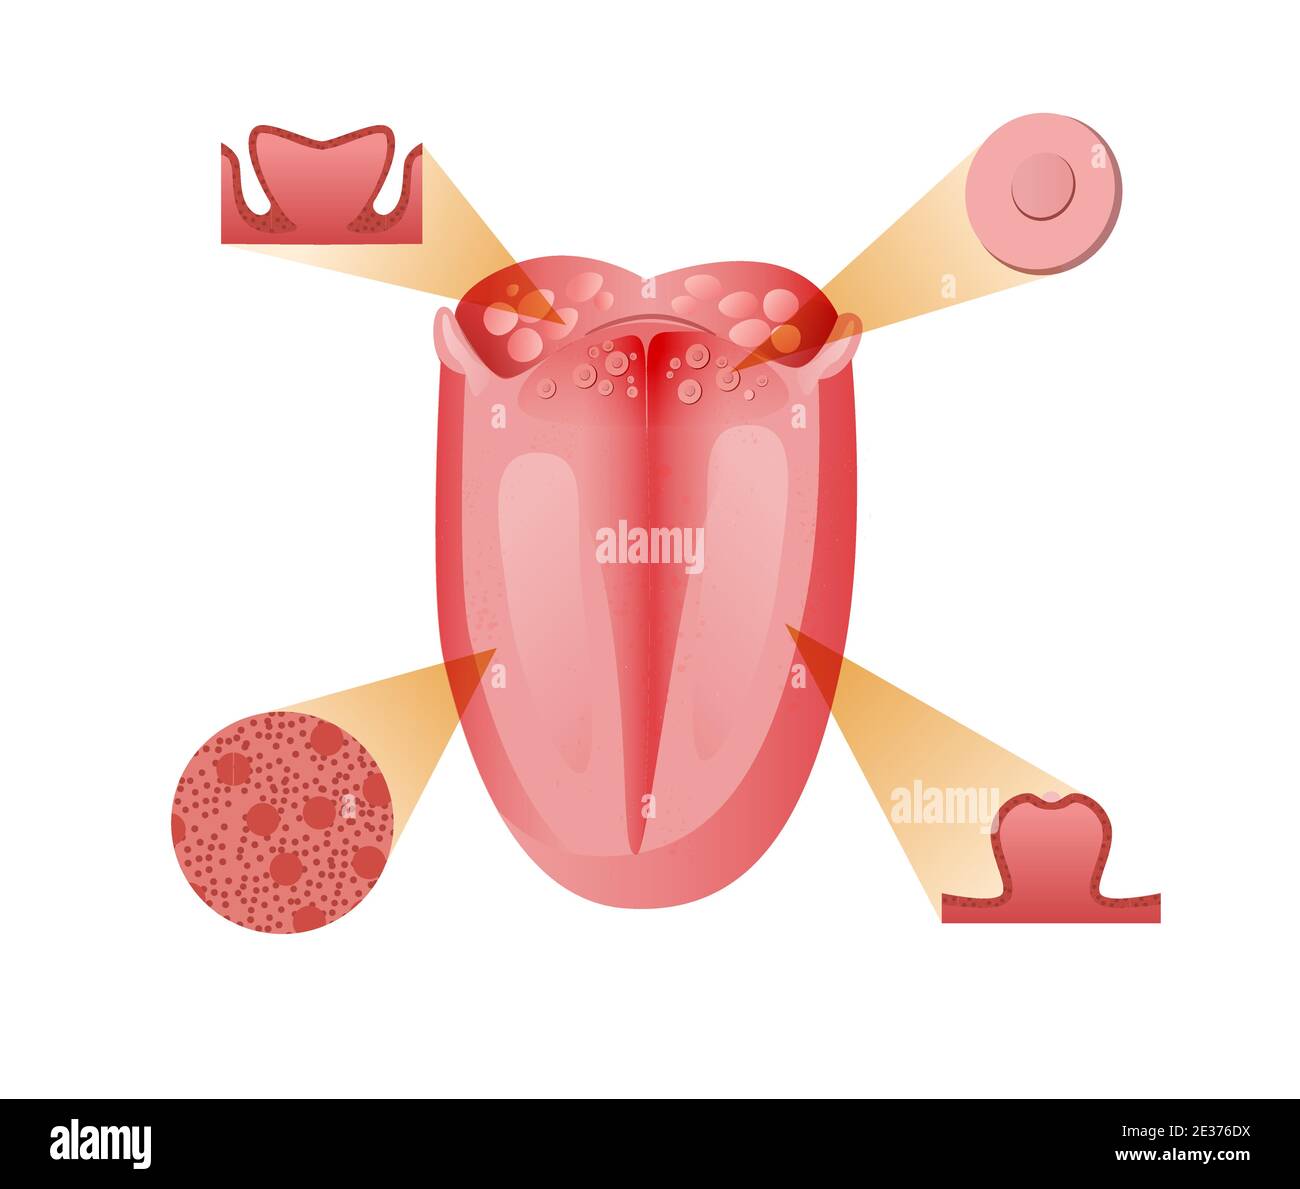 Main receptors and cells tongue. Basic bitter sensation receptor with schematic sour red sweet and salty flavor. Stock Vector